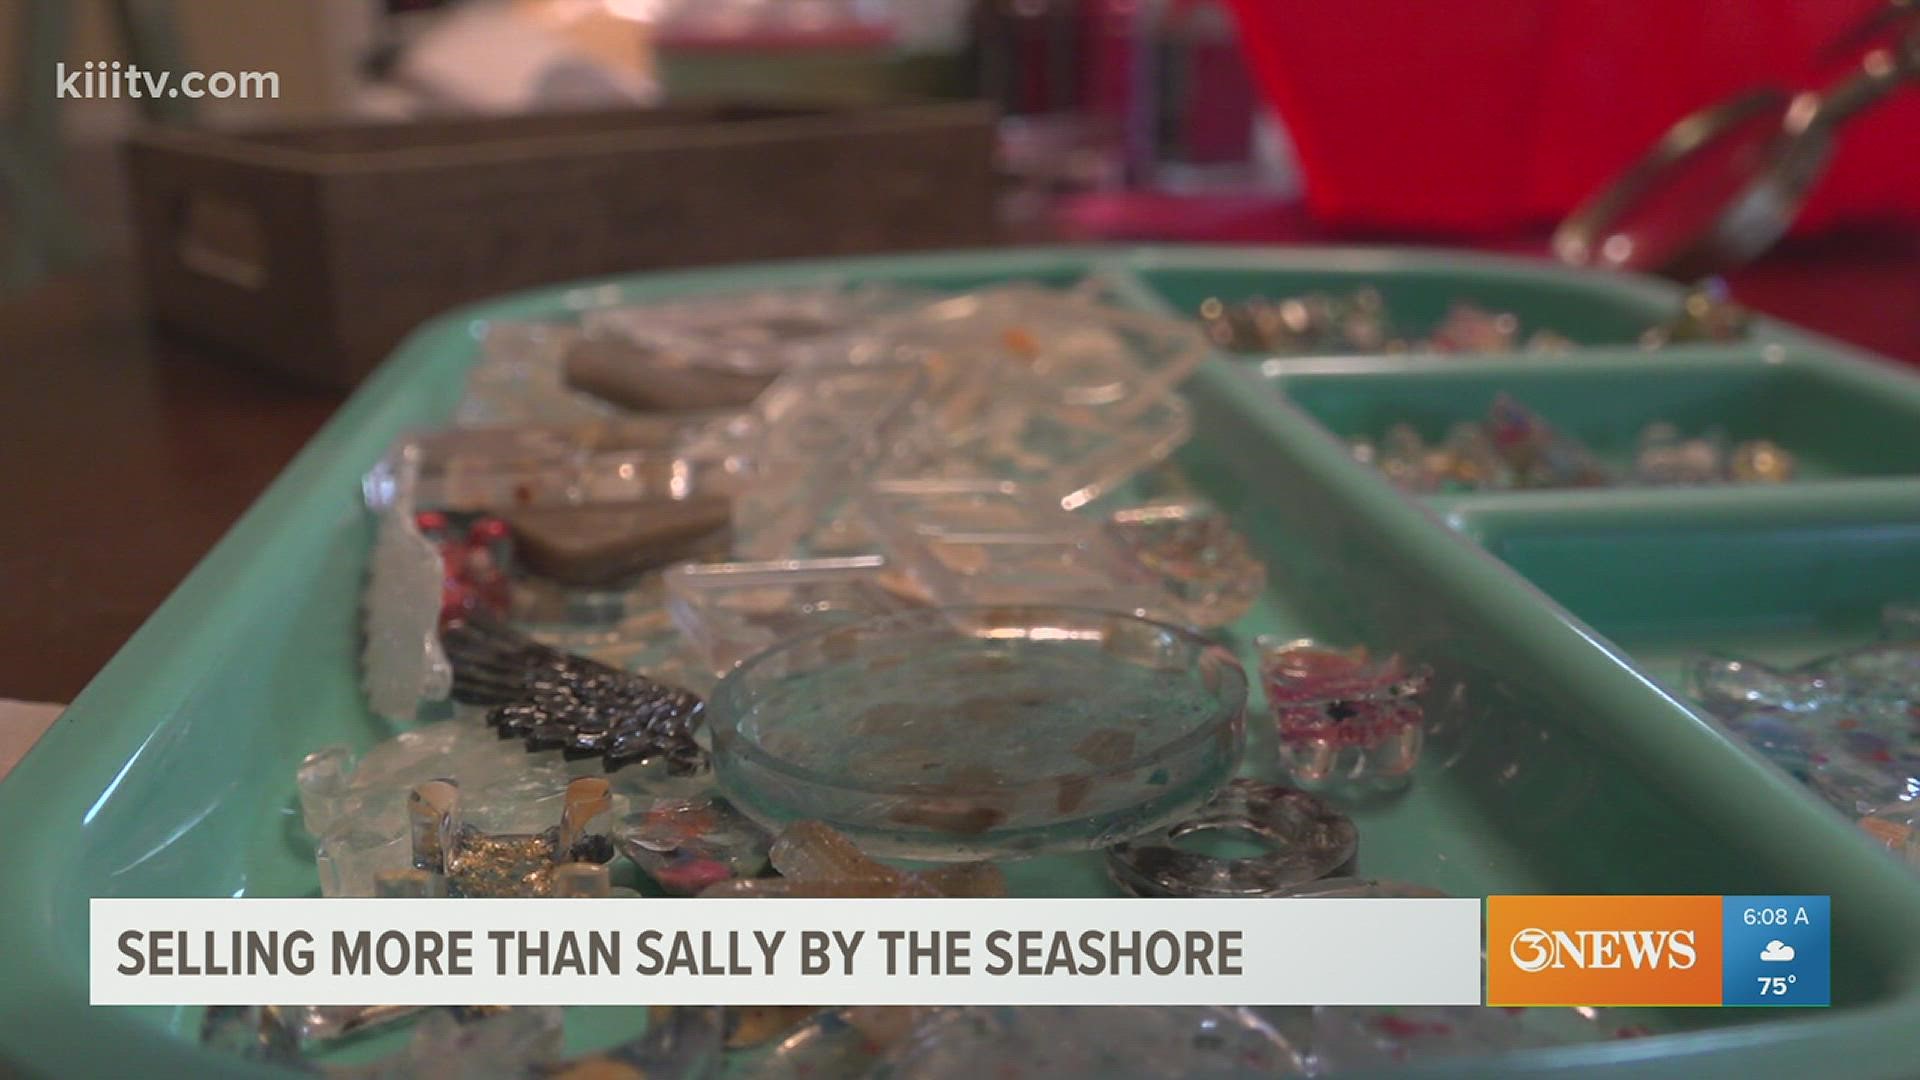 Jennifer Breunig, owner of Memento Padre, uses sand, seashells and plastic to make jewelry pieces and even custom items.